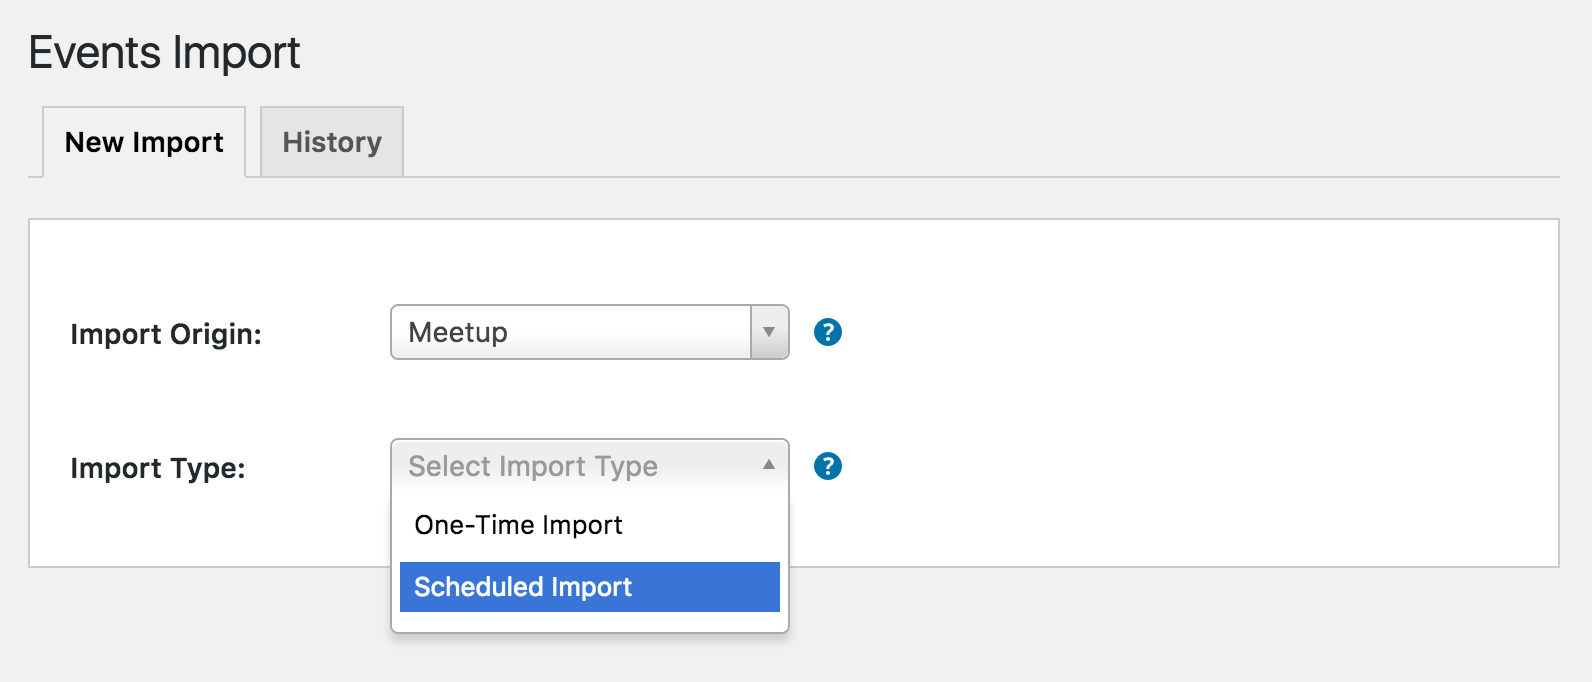 Select the import type